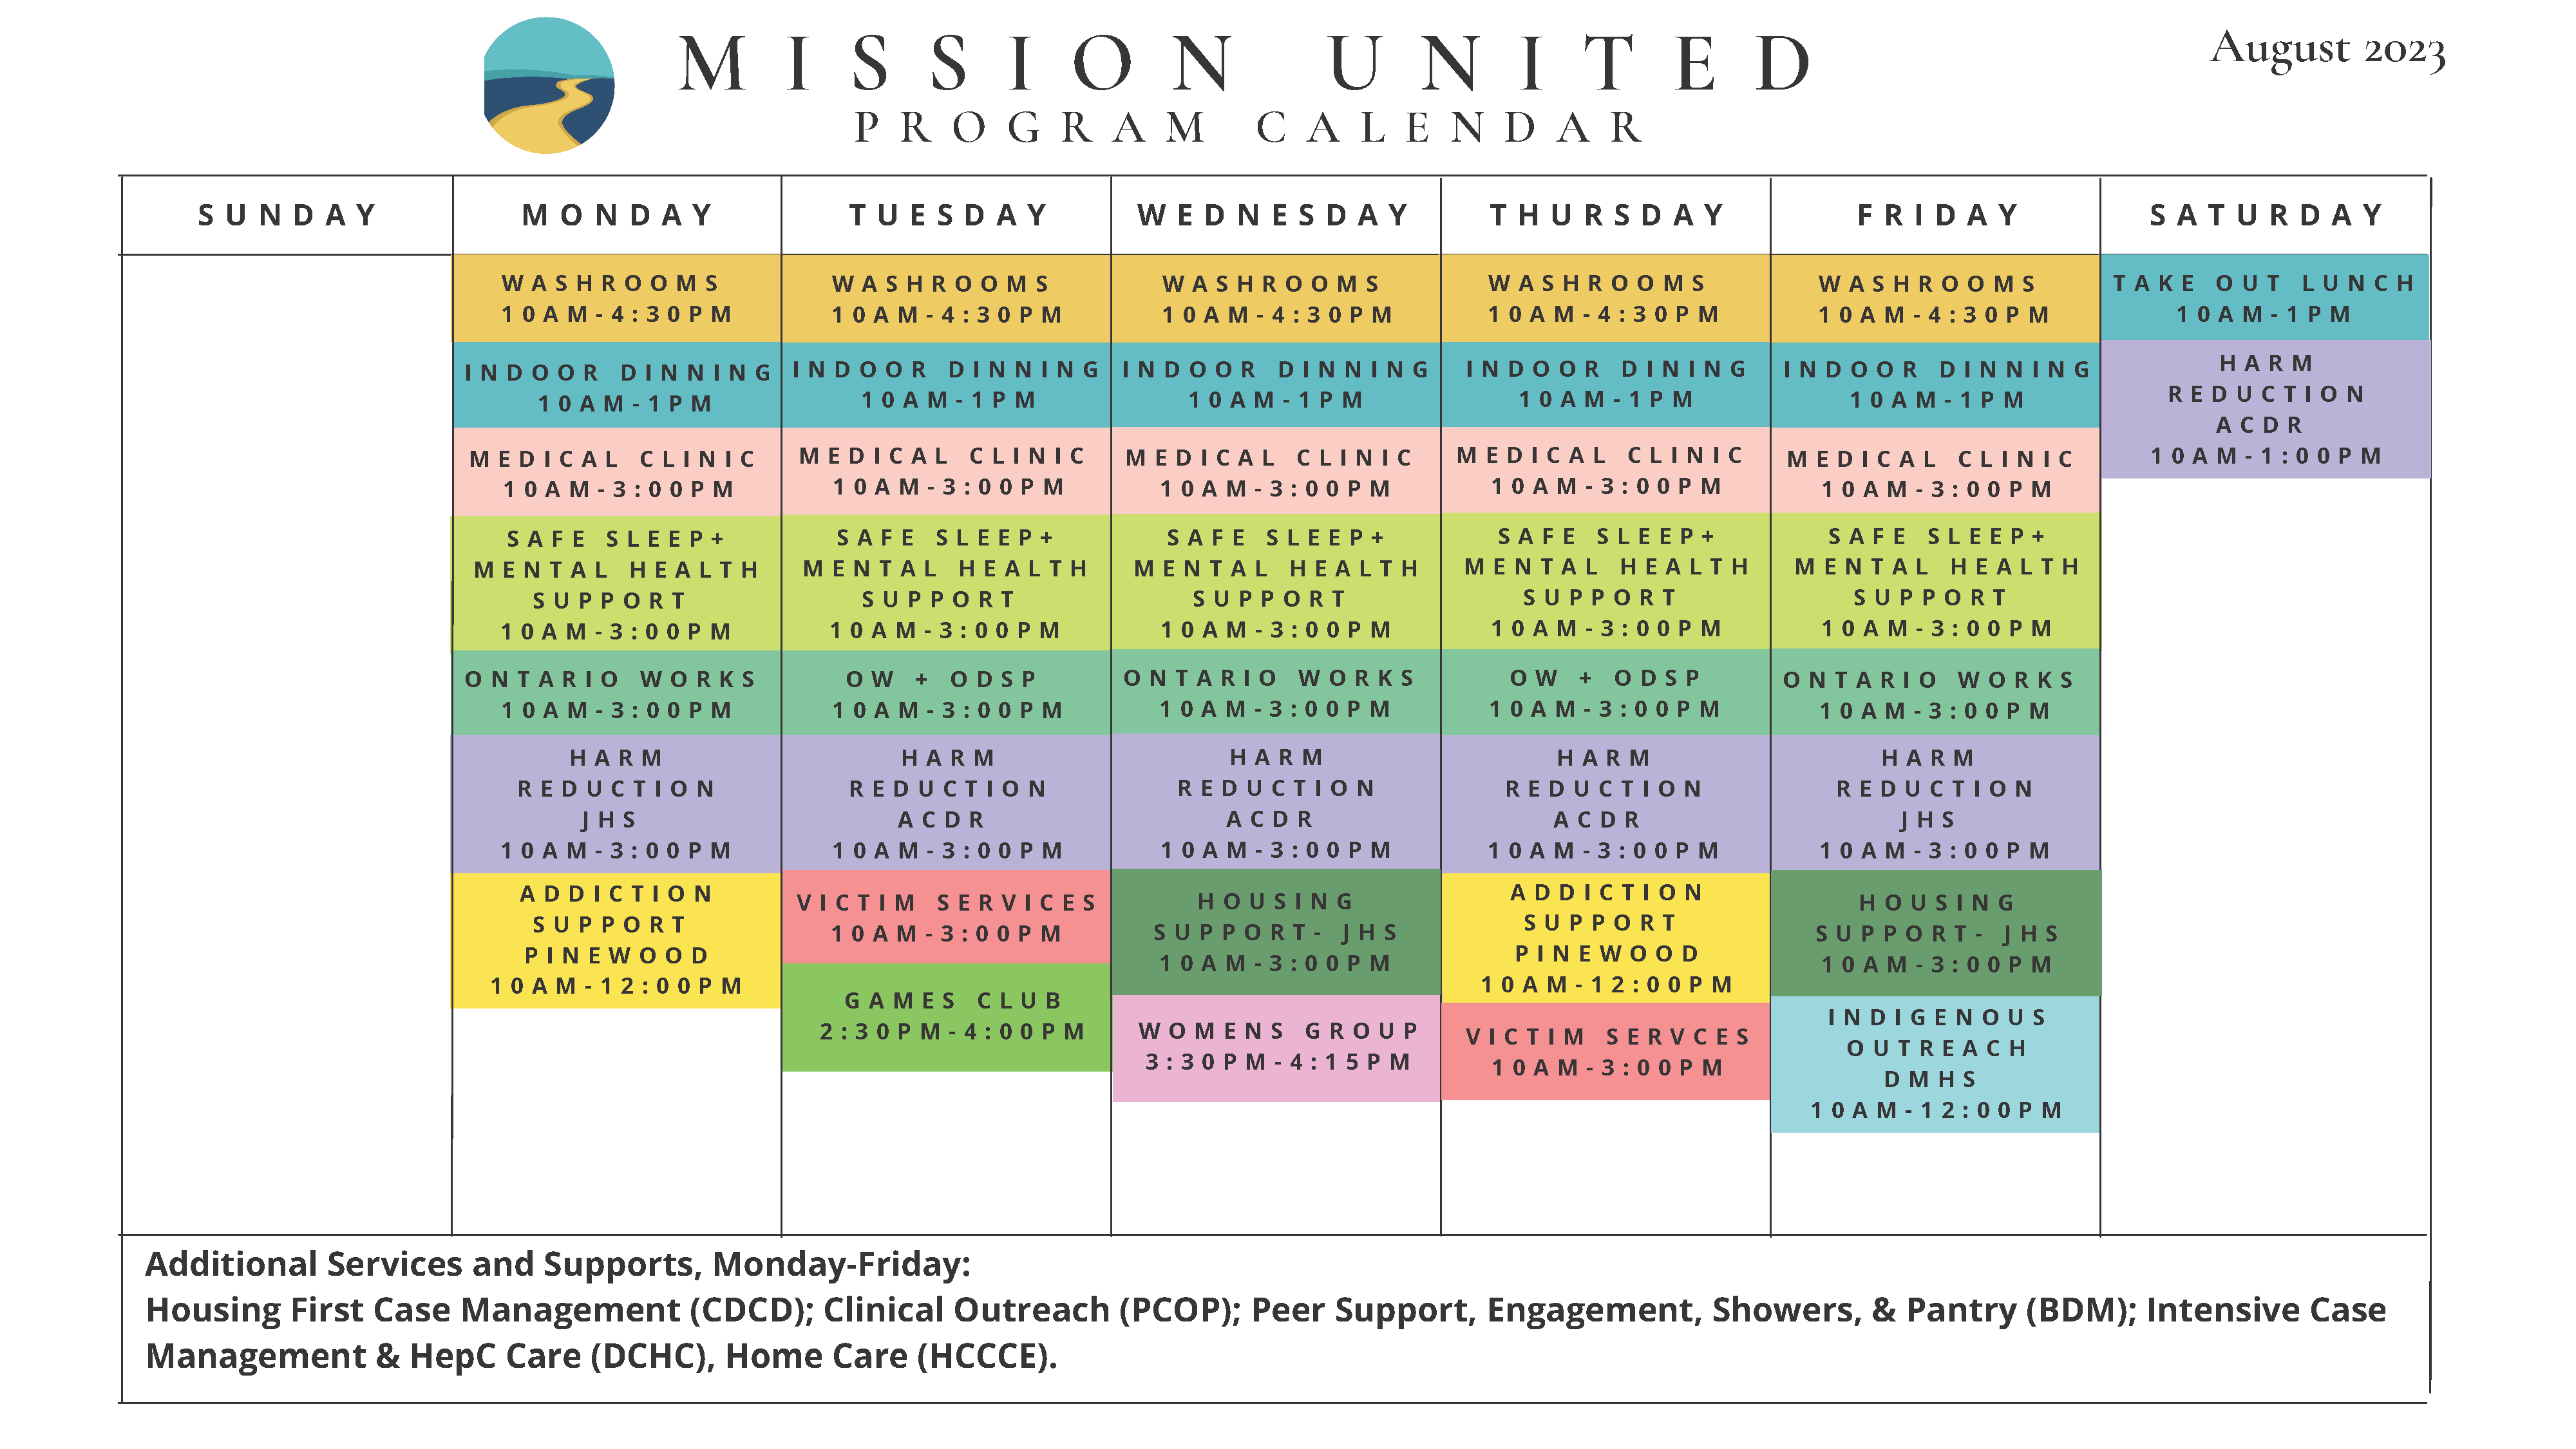 The image is of a Sunday to Saturday calendar with activities listed for each day.